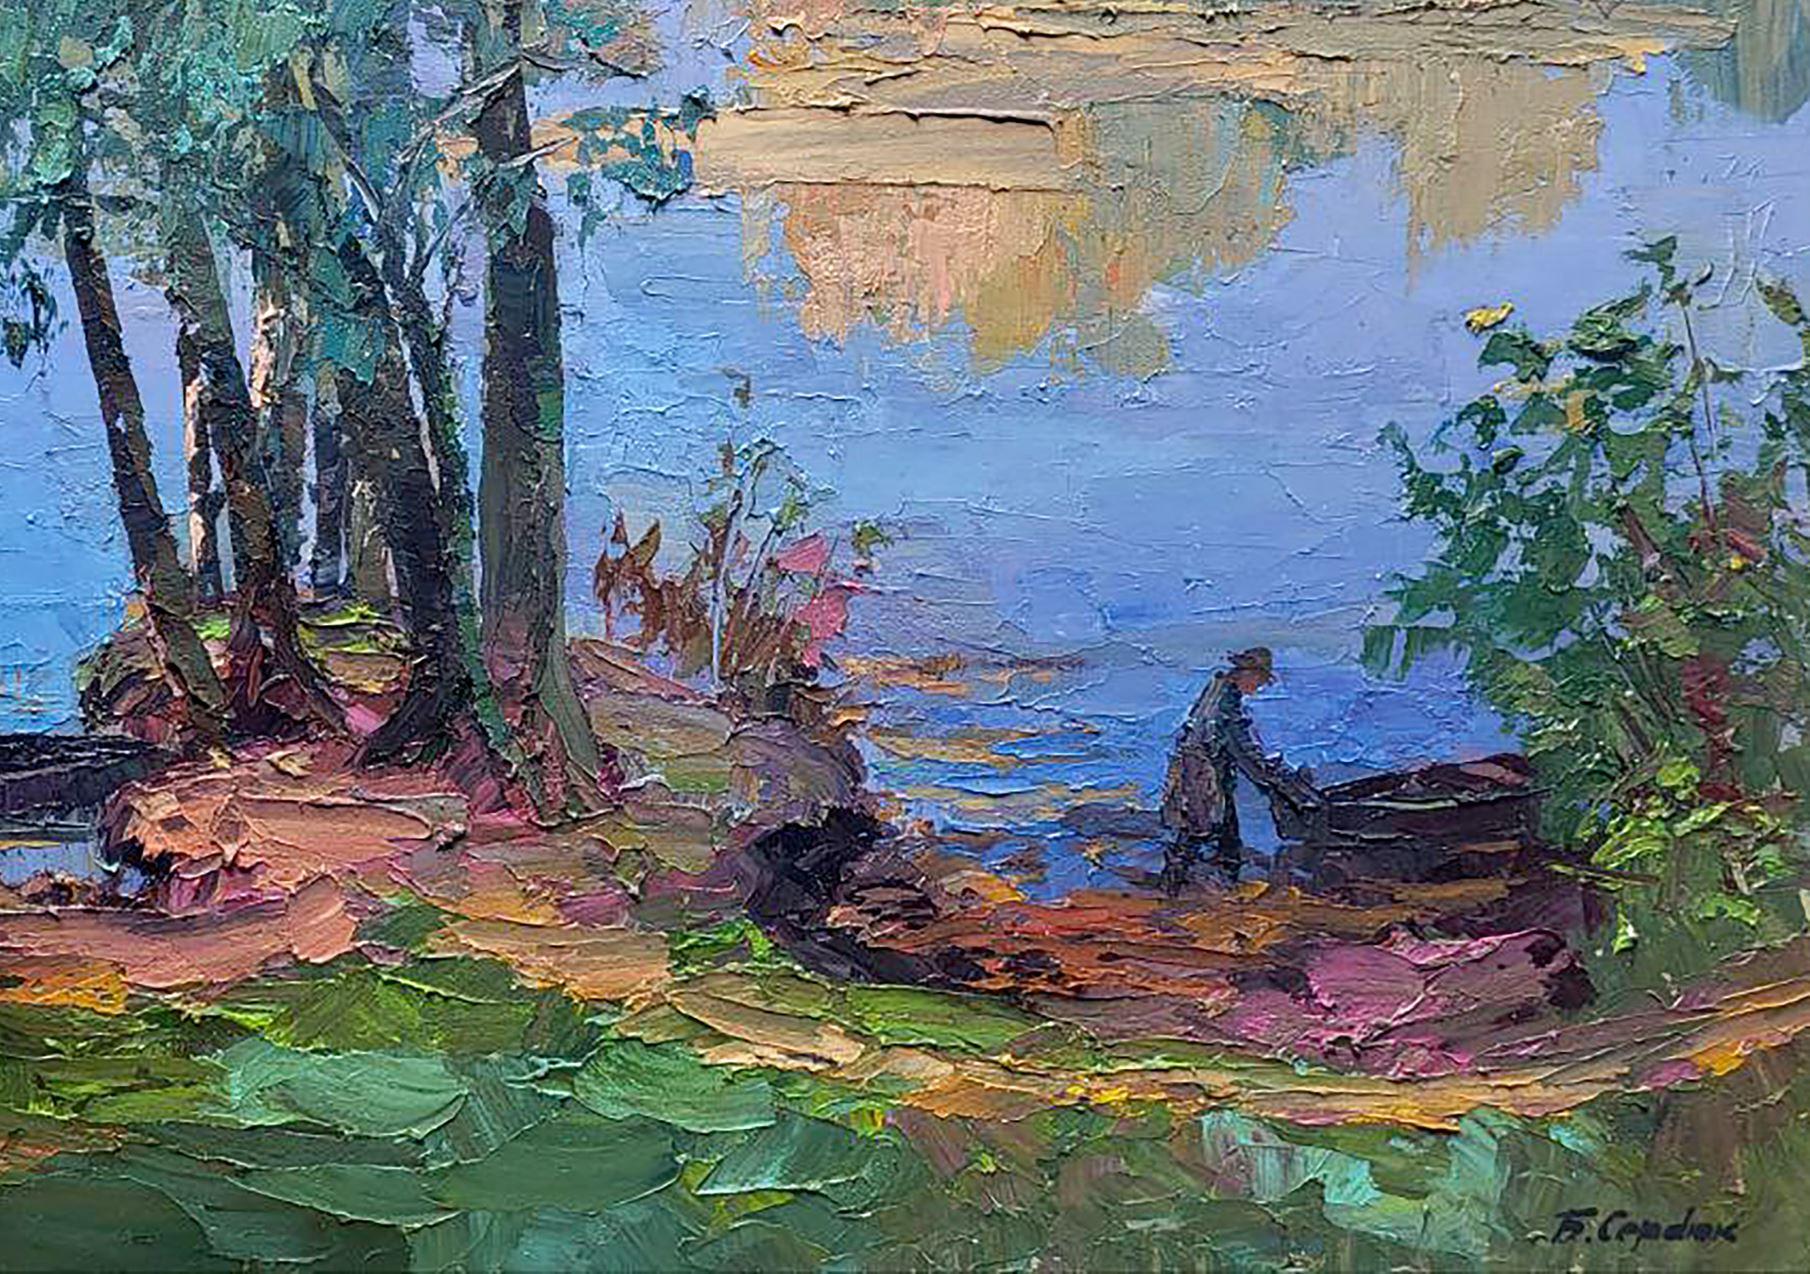 Morning on the lake, Landscape, Original oil Painting, Ready to Hang - Gray Landscape Painting by Boris Serdyuk 